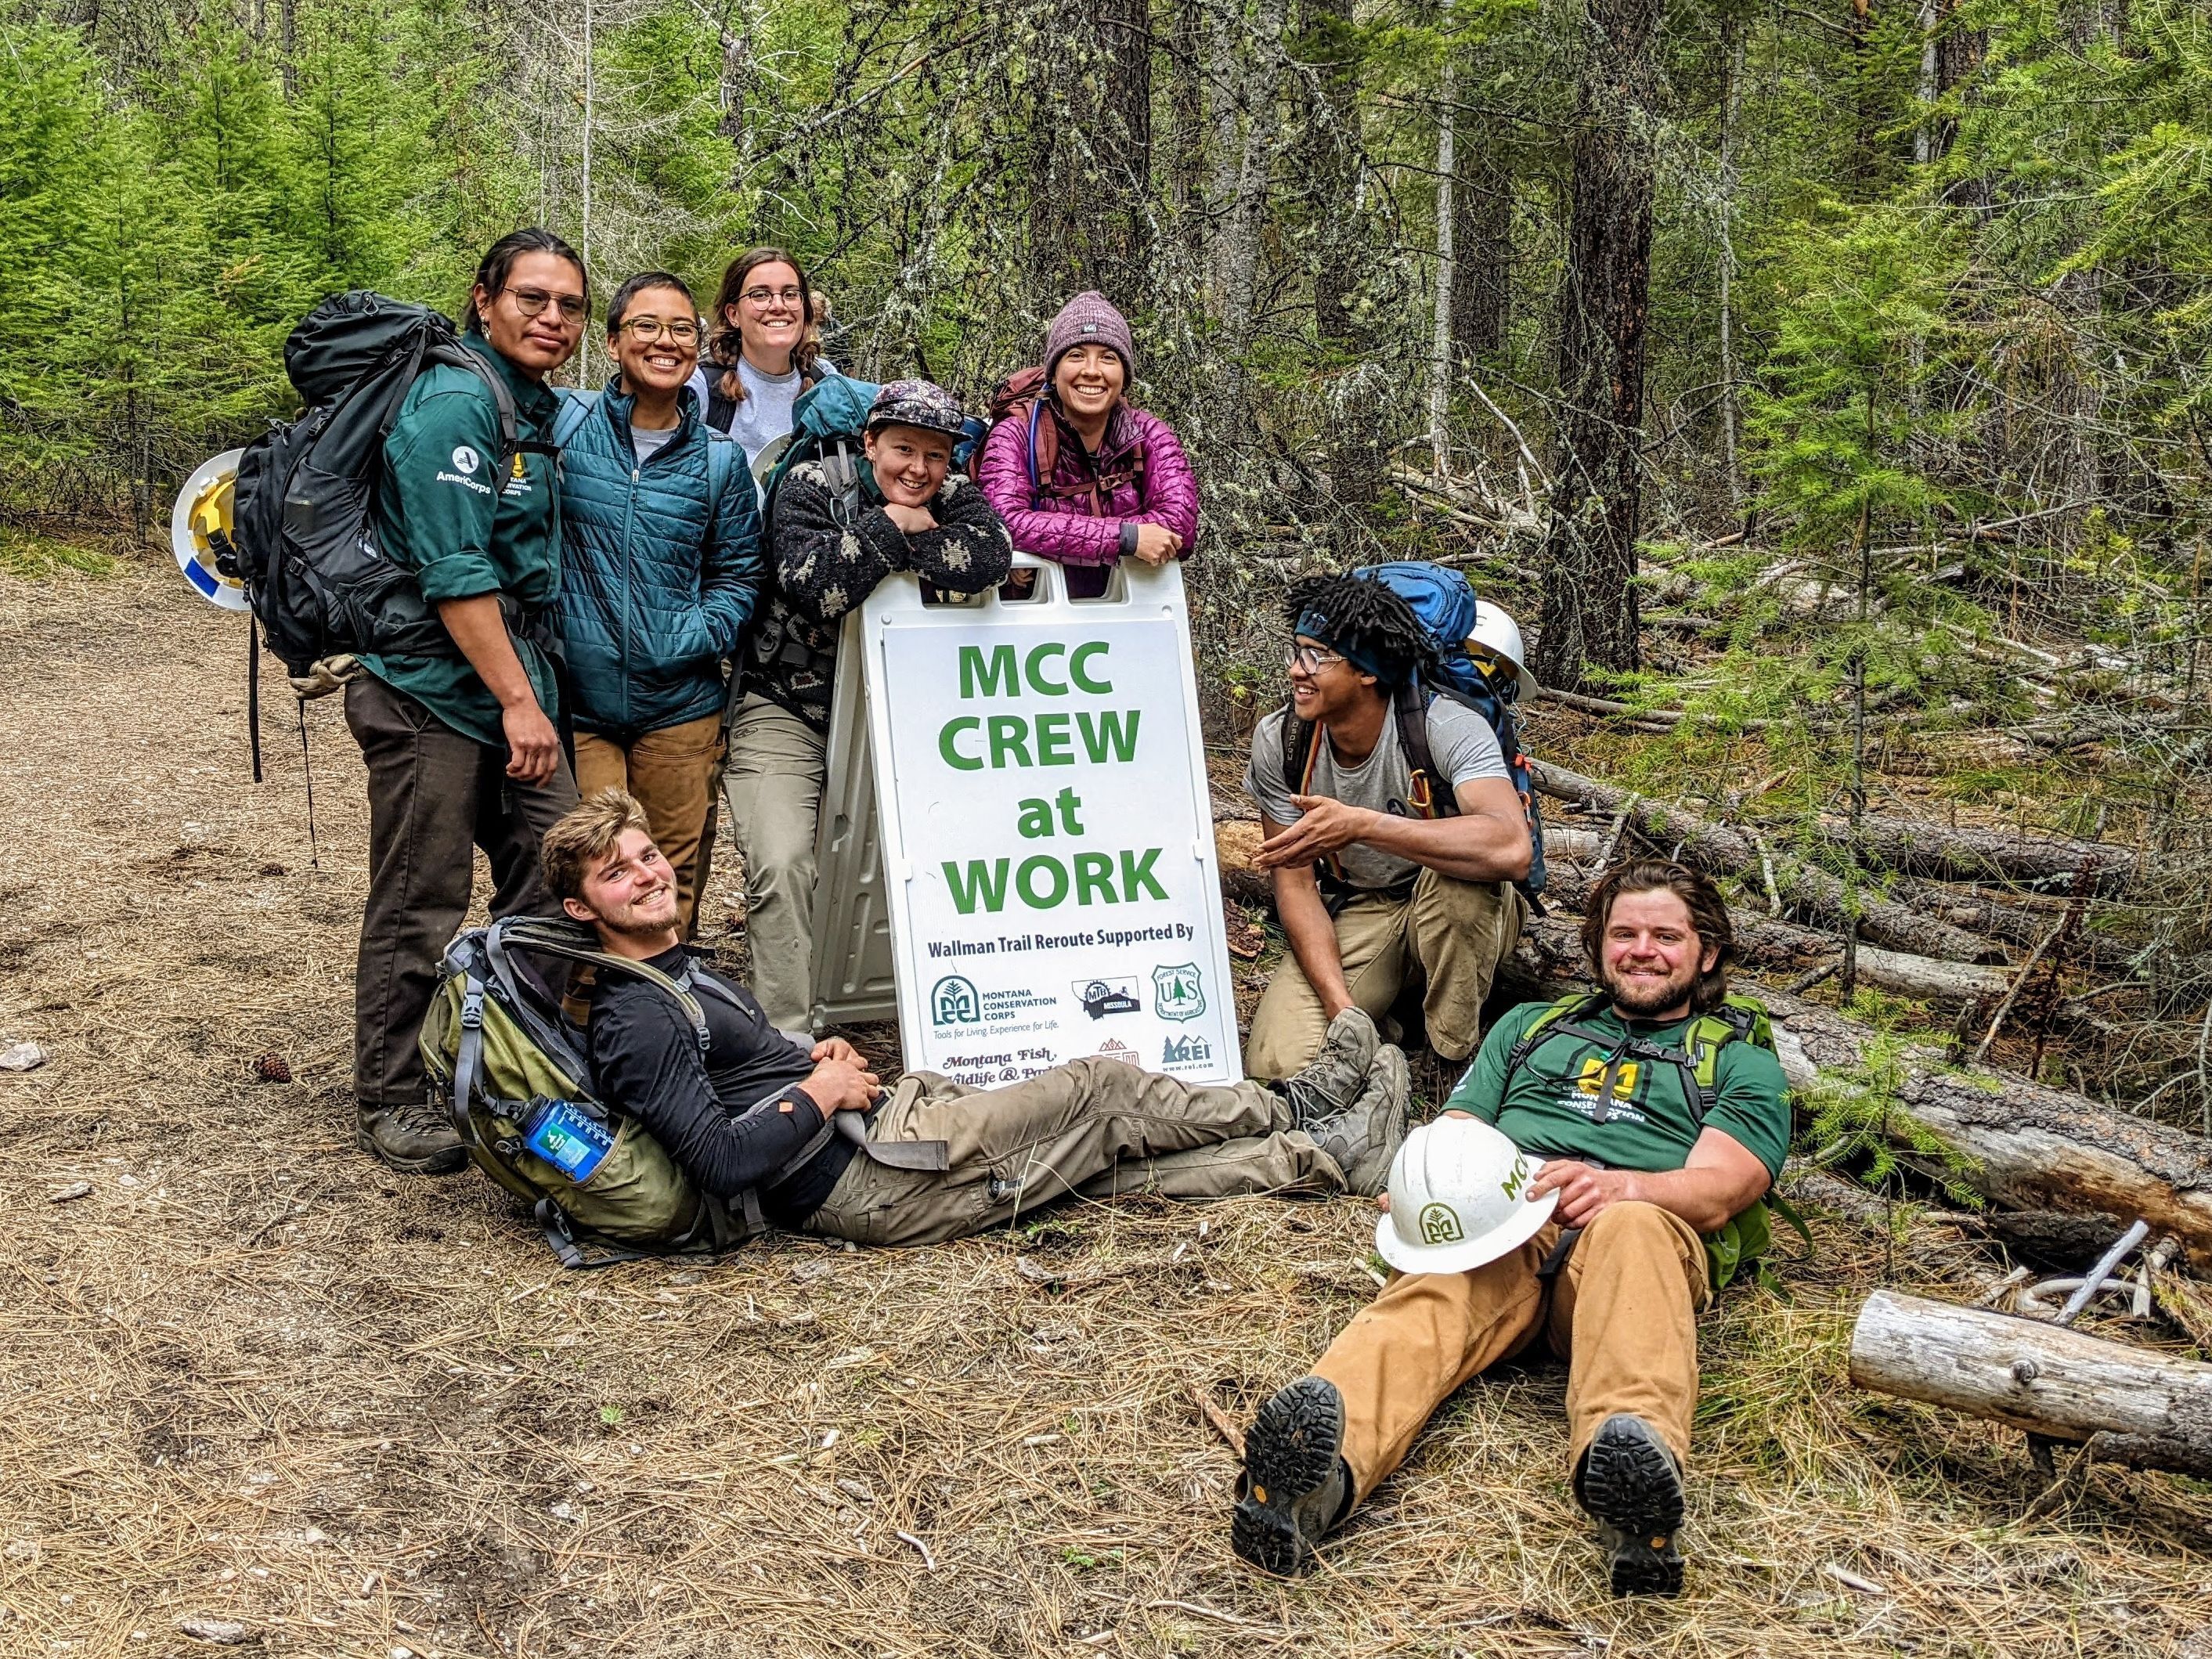 A crew stands smiling next to a sign that reads "MCC Crew At Work" and "Wallman Trail Sponsored By" with a list of logos and sponsors below.